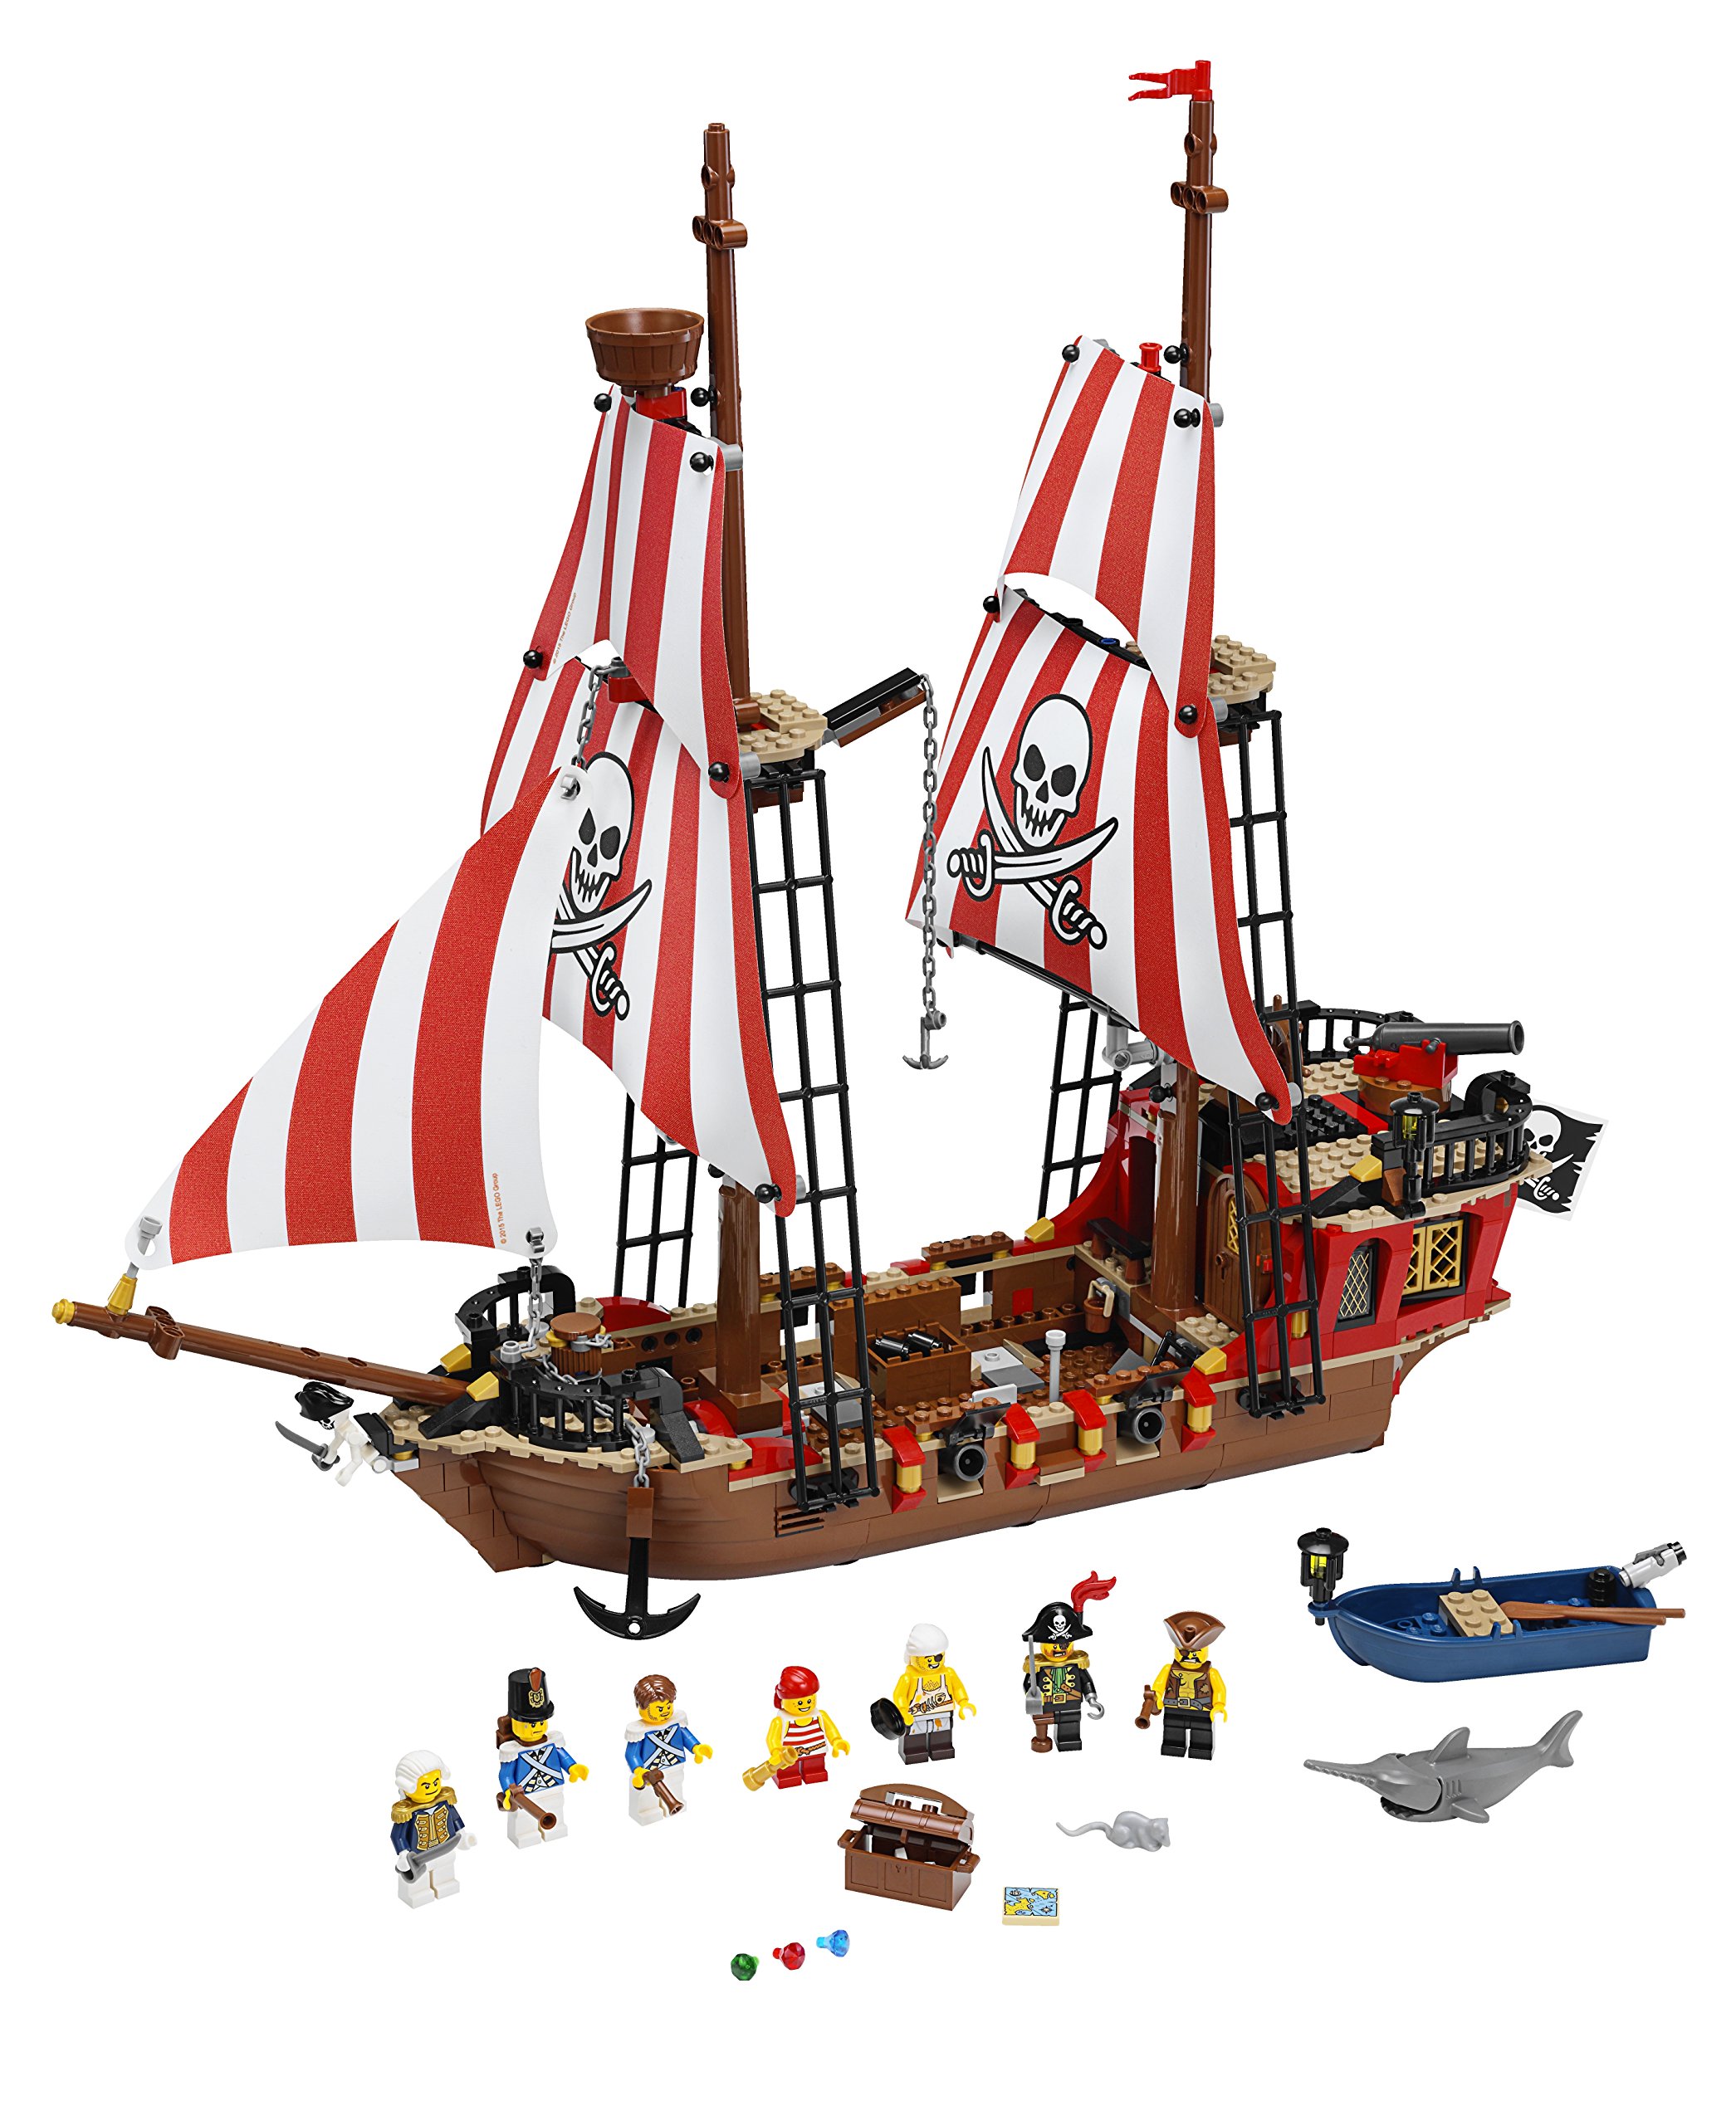 LEGO Pirates The Brick Bounty (70413) (Discontinued by Manufacturer)